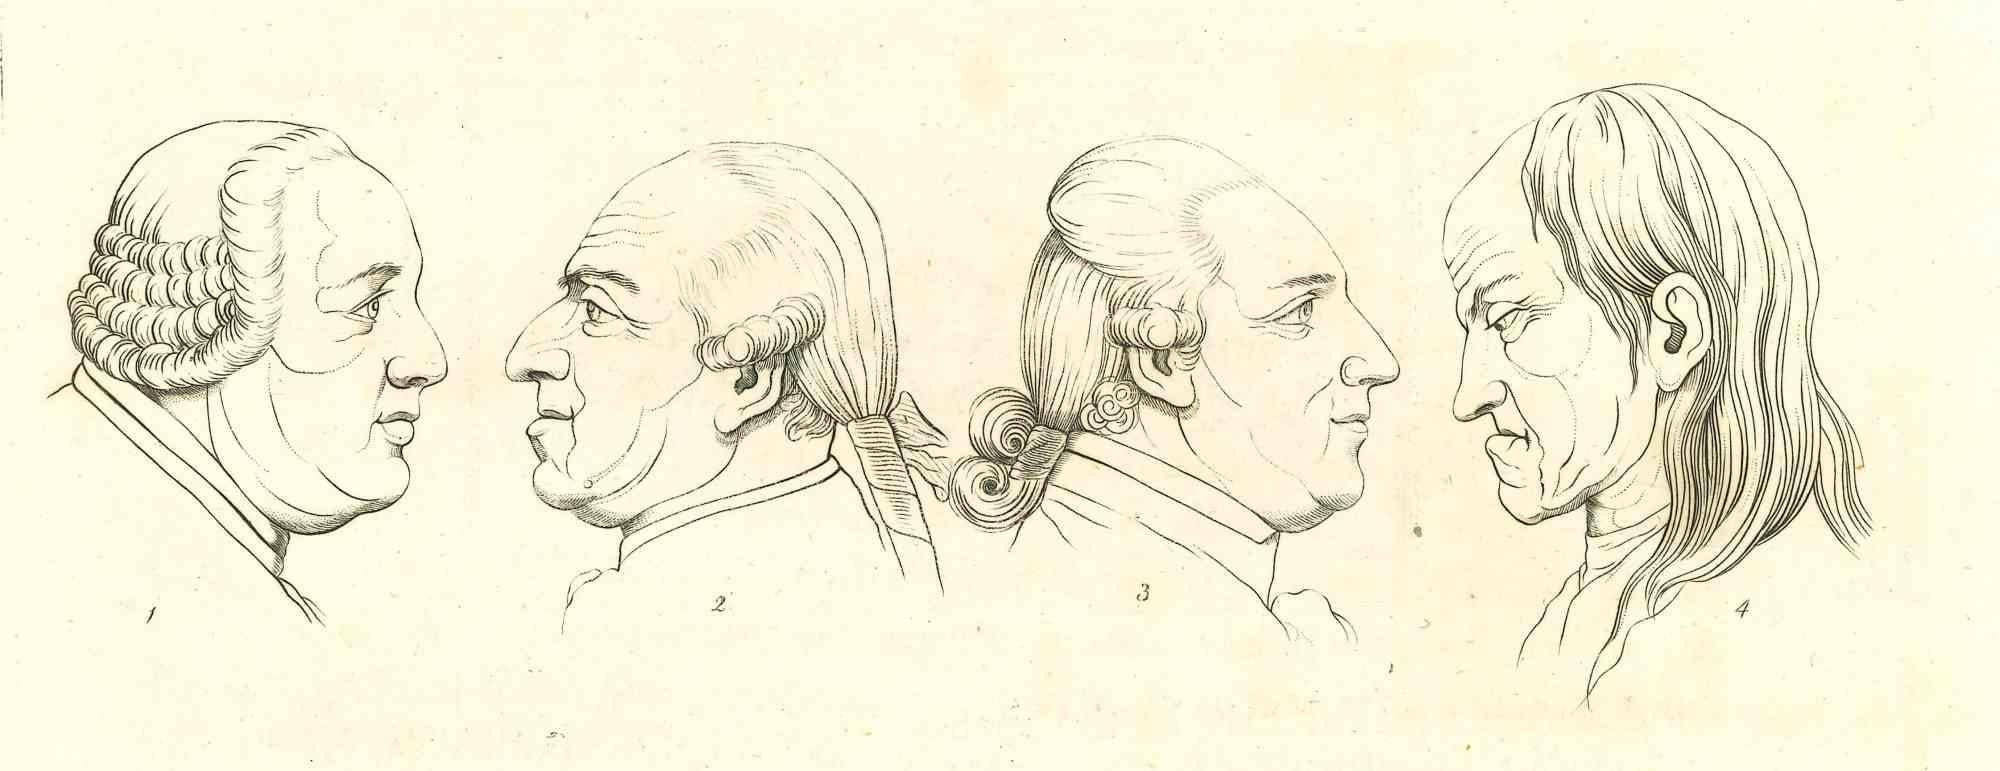 Heads of Men - Original Etching by Thomas Holloway - 1810